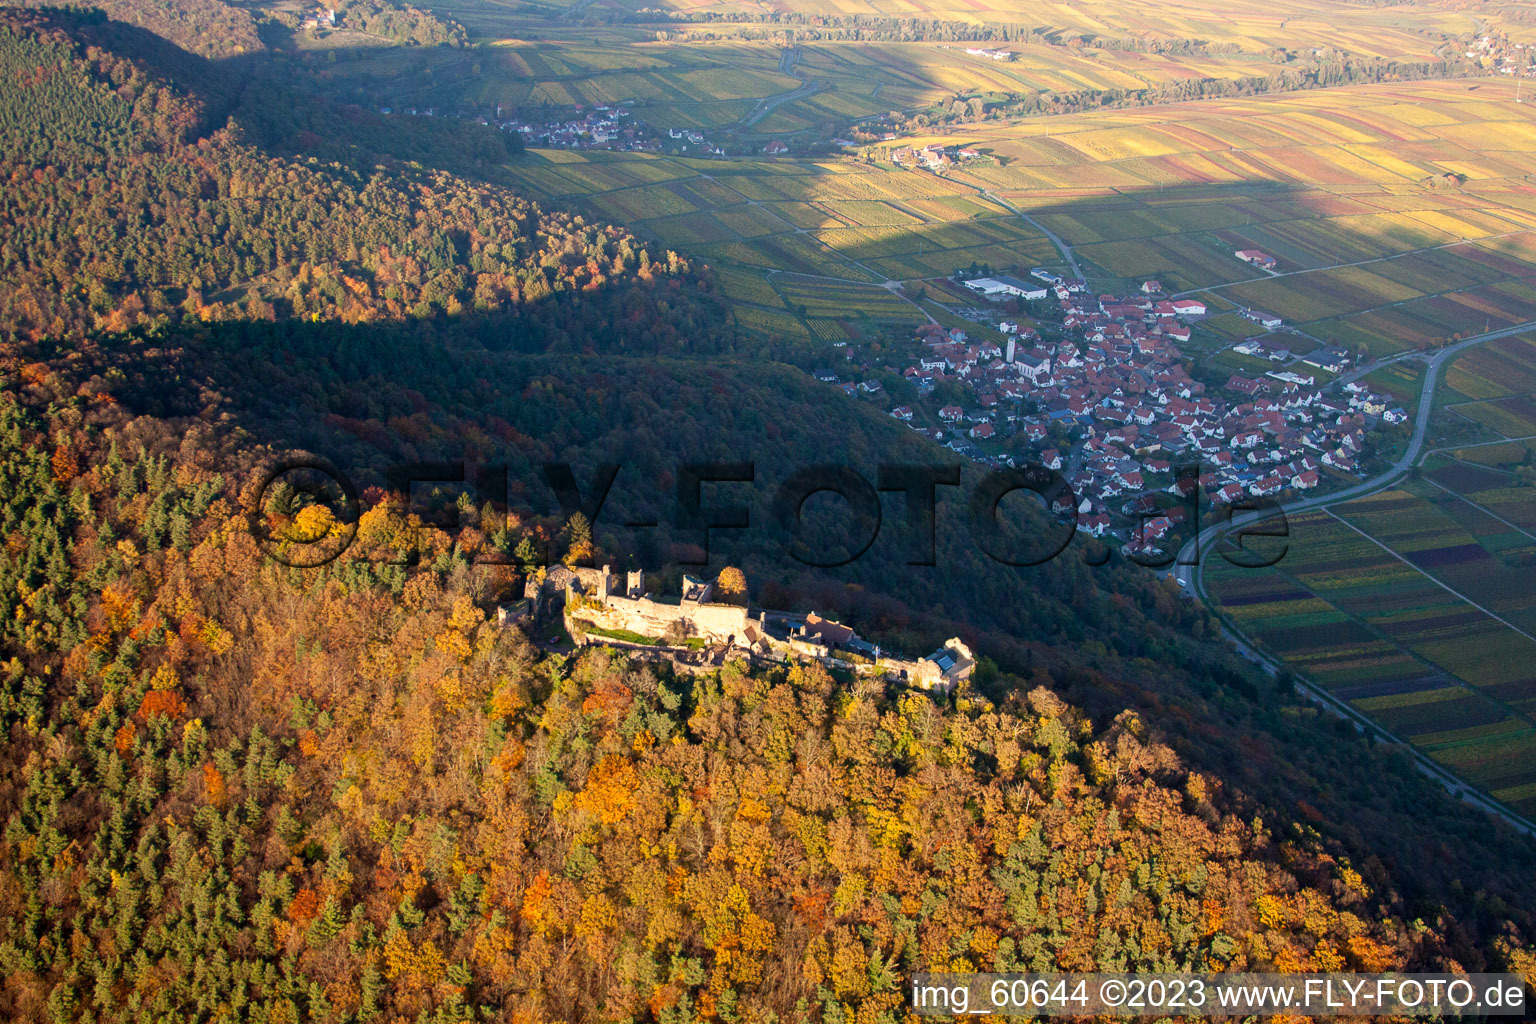 Madenburg in Eschbach in the state Rhineland-Palatinate, Germany from a drone